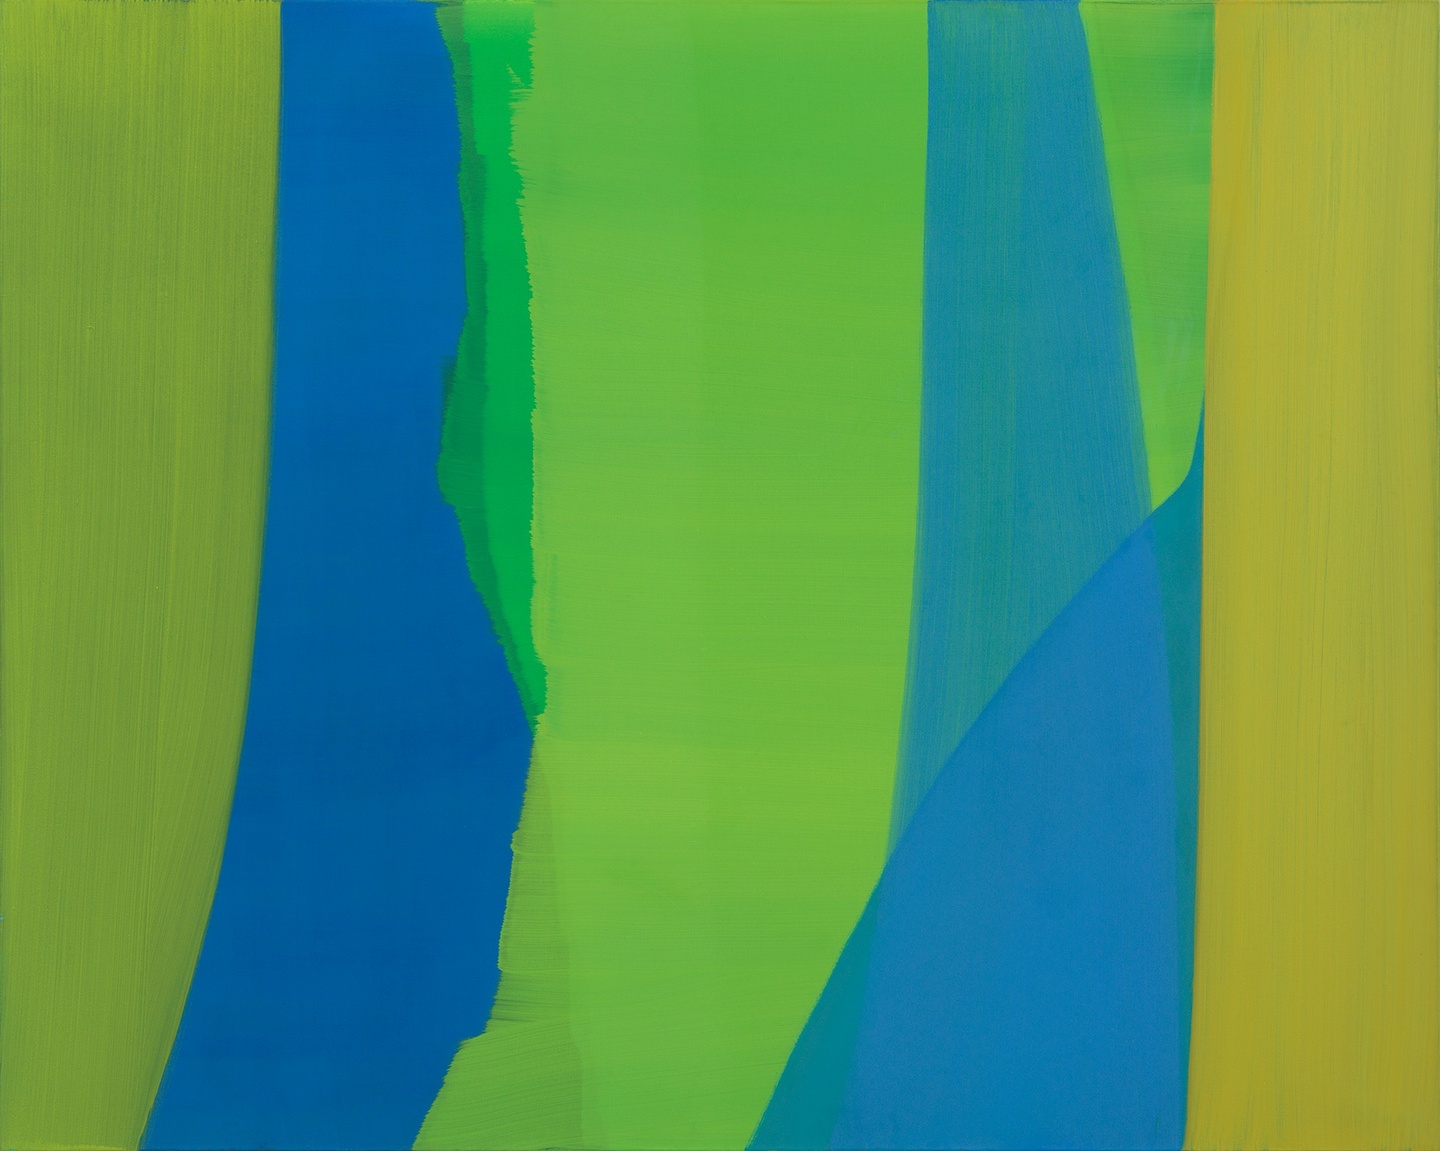 An abstract painting with vertical bands of color in greens and blues